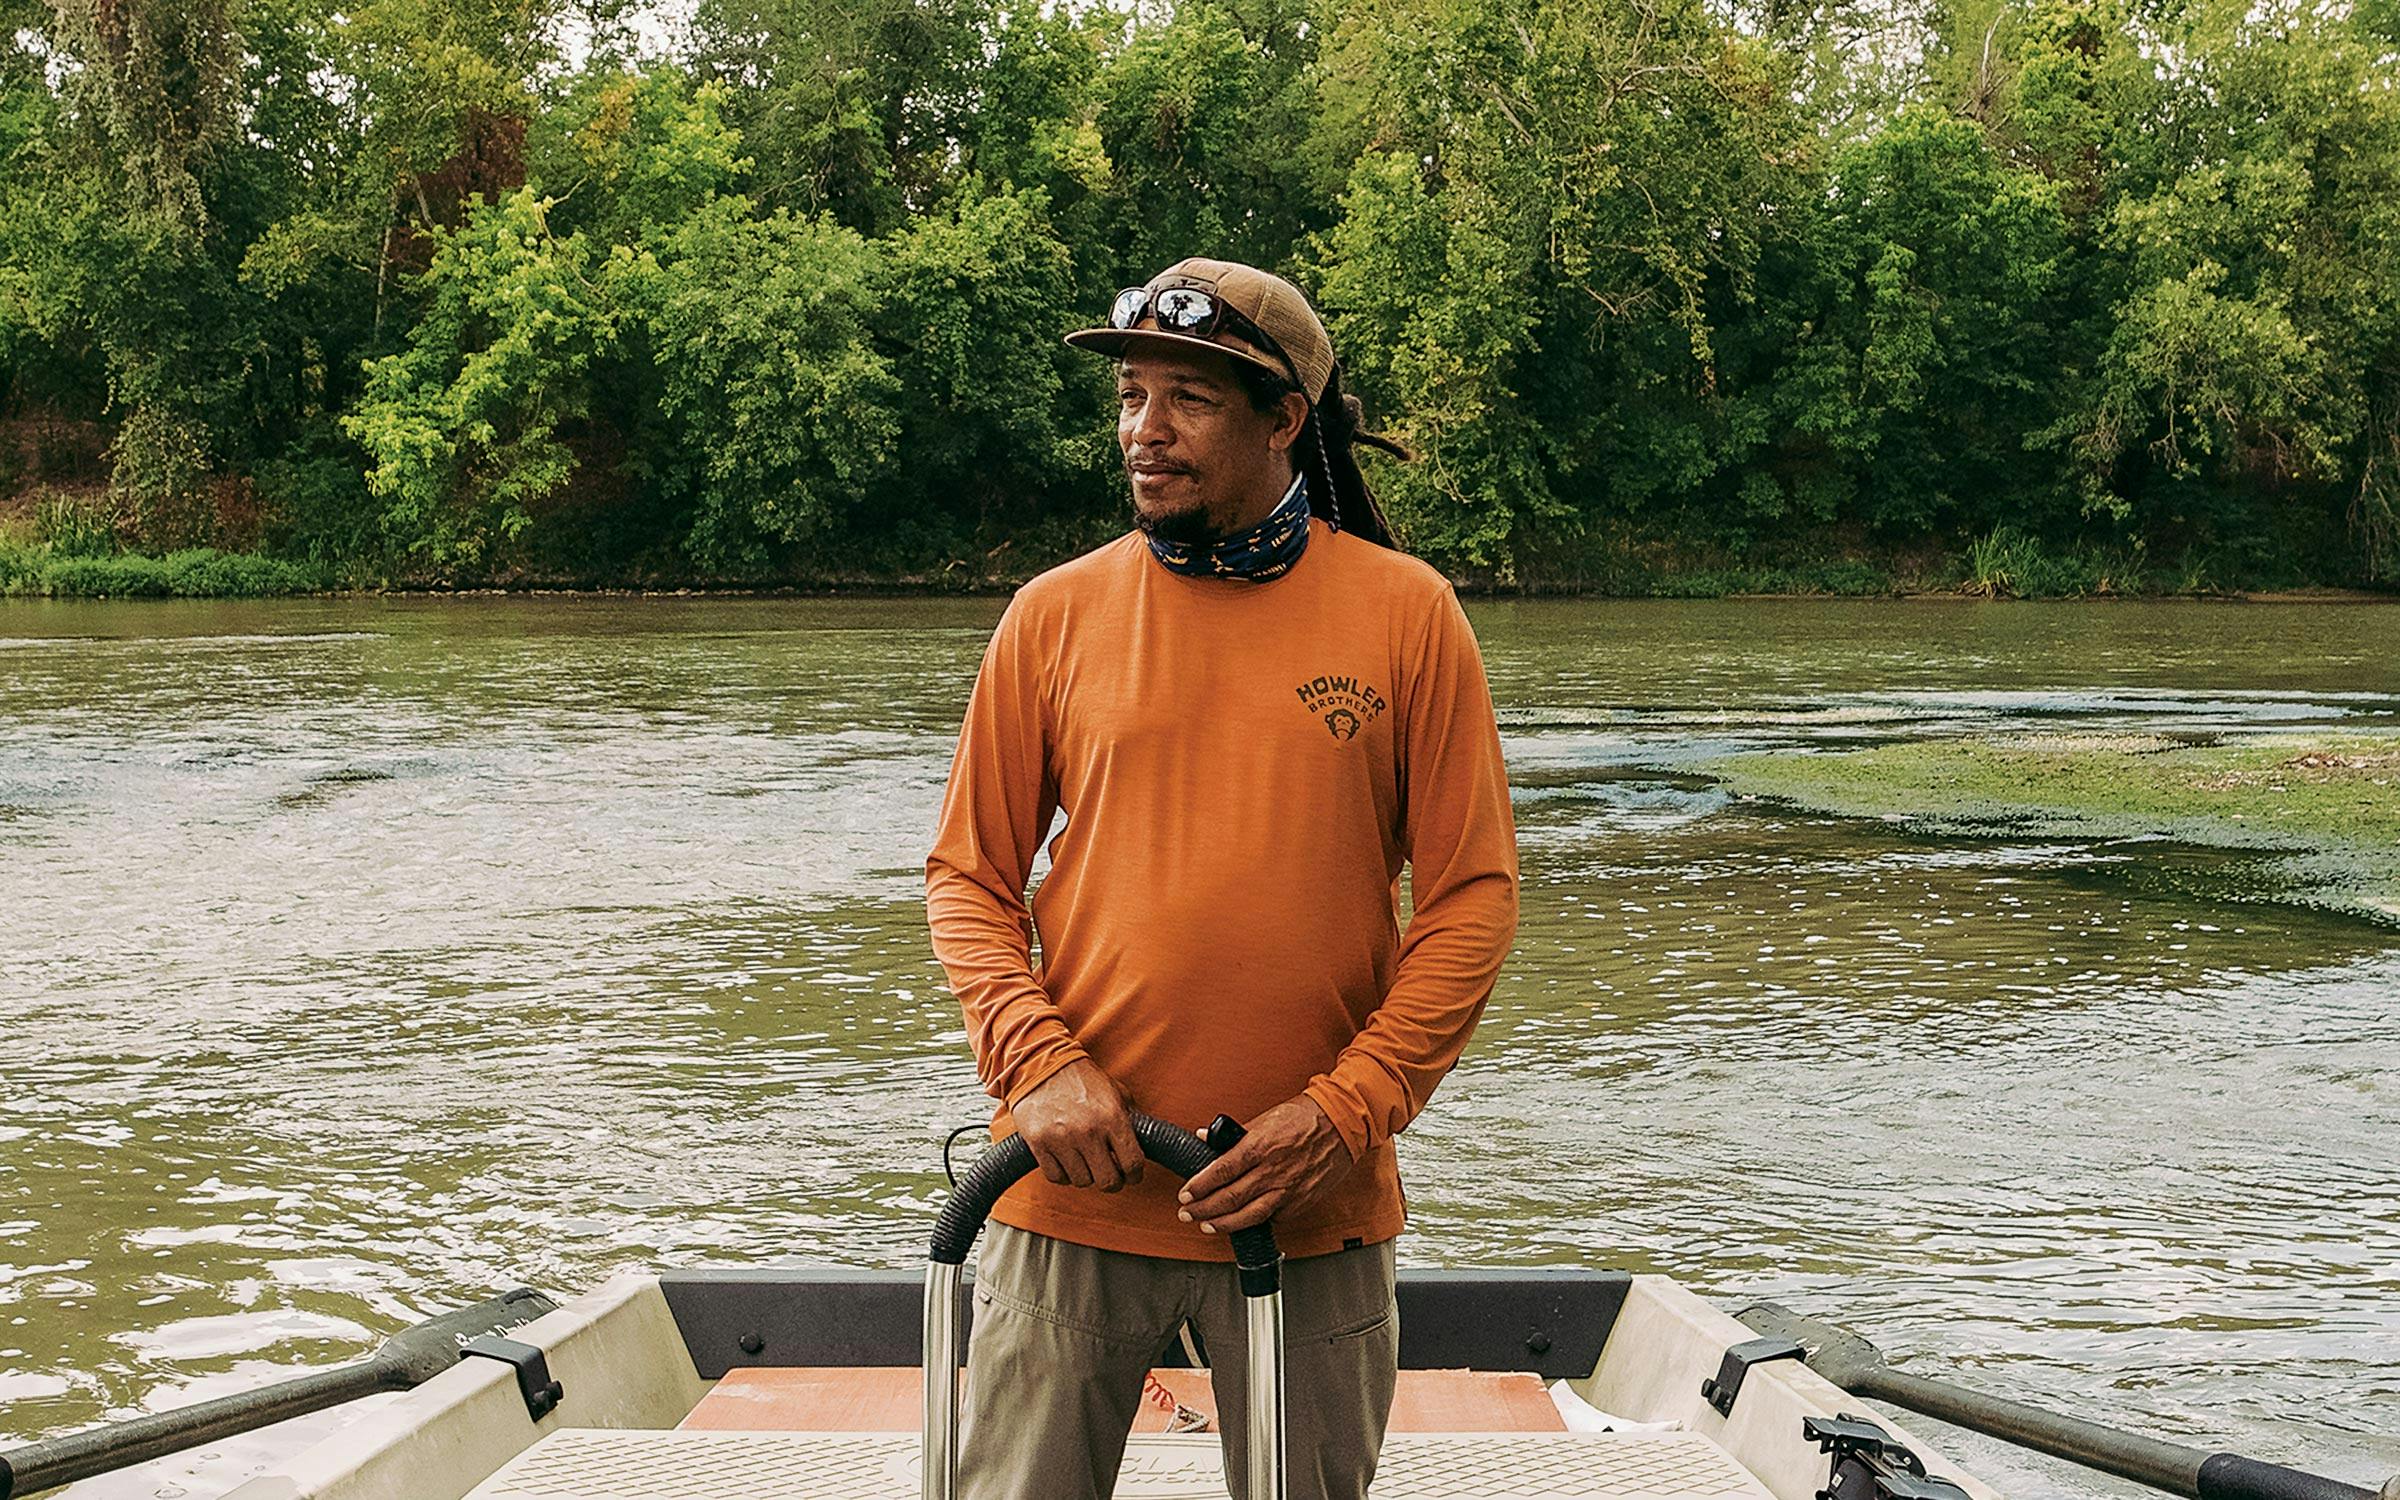 https://img.texasmonthly.com/2022/09/Alvin-Dedeaux-fly-fishing-Austin-angling-former-punk-funk-star-feat.jpg?auto=compress&crop=faces&fit=fit&fm=pjpg&ixlib=php-3.3.1&q=45